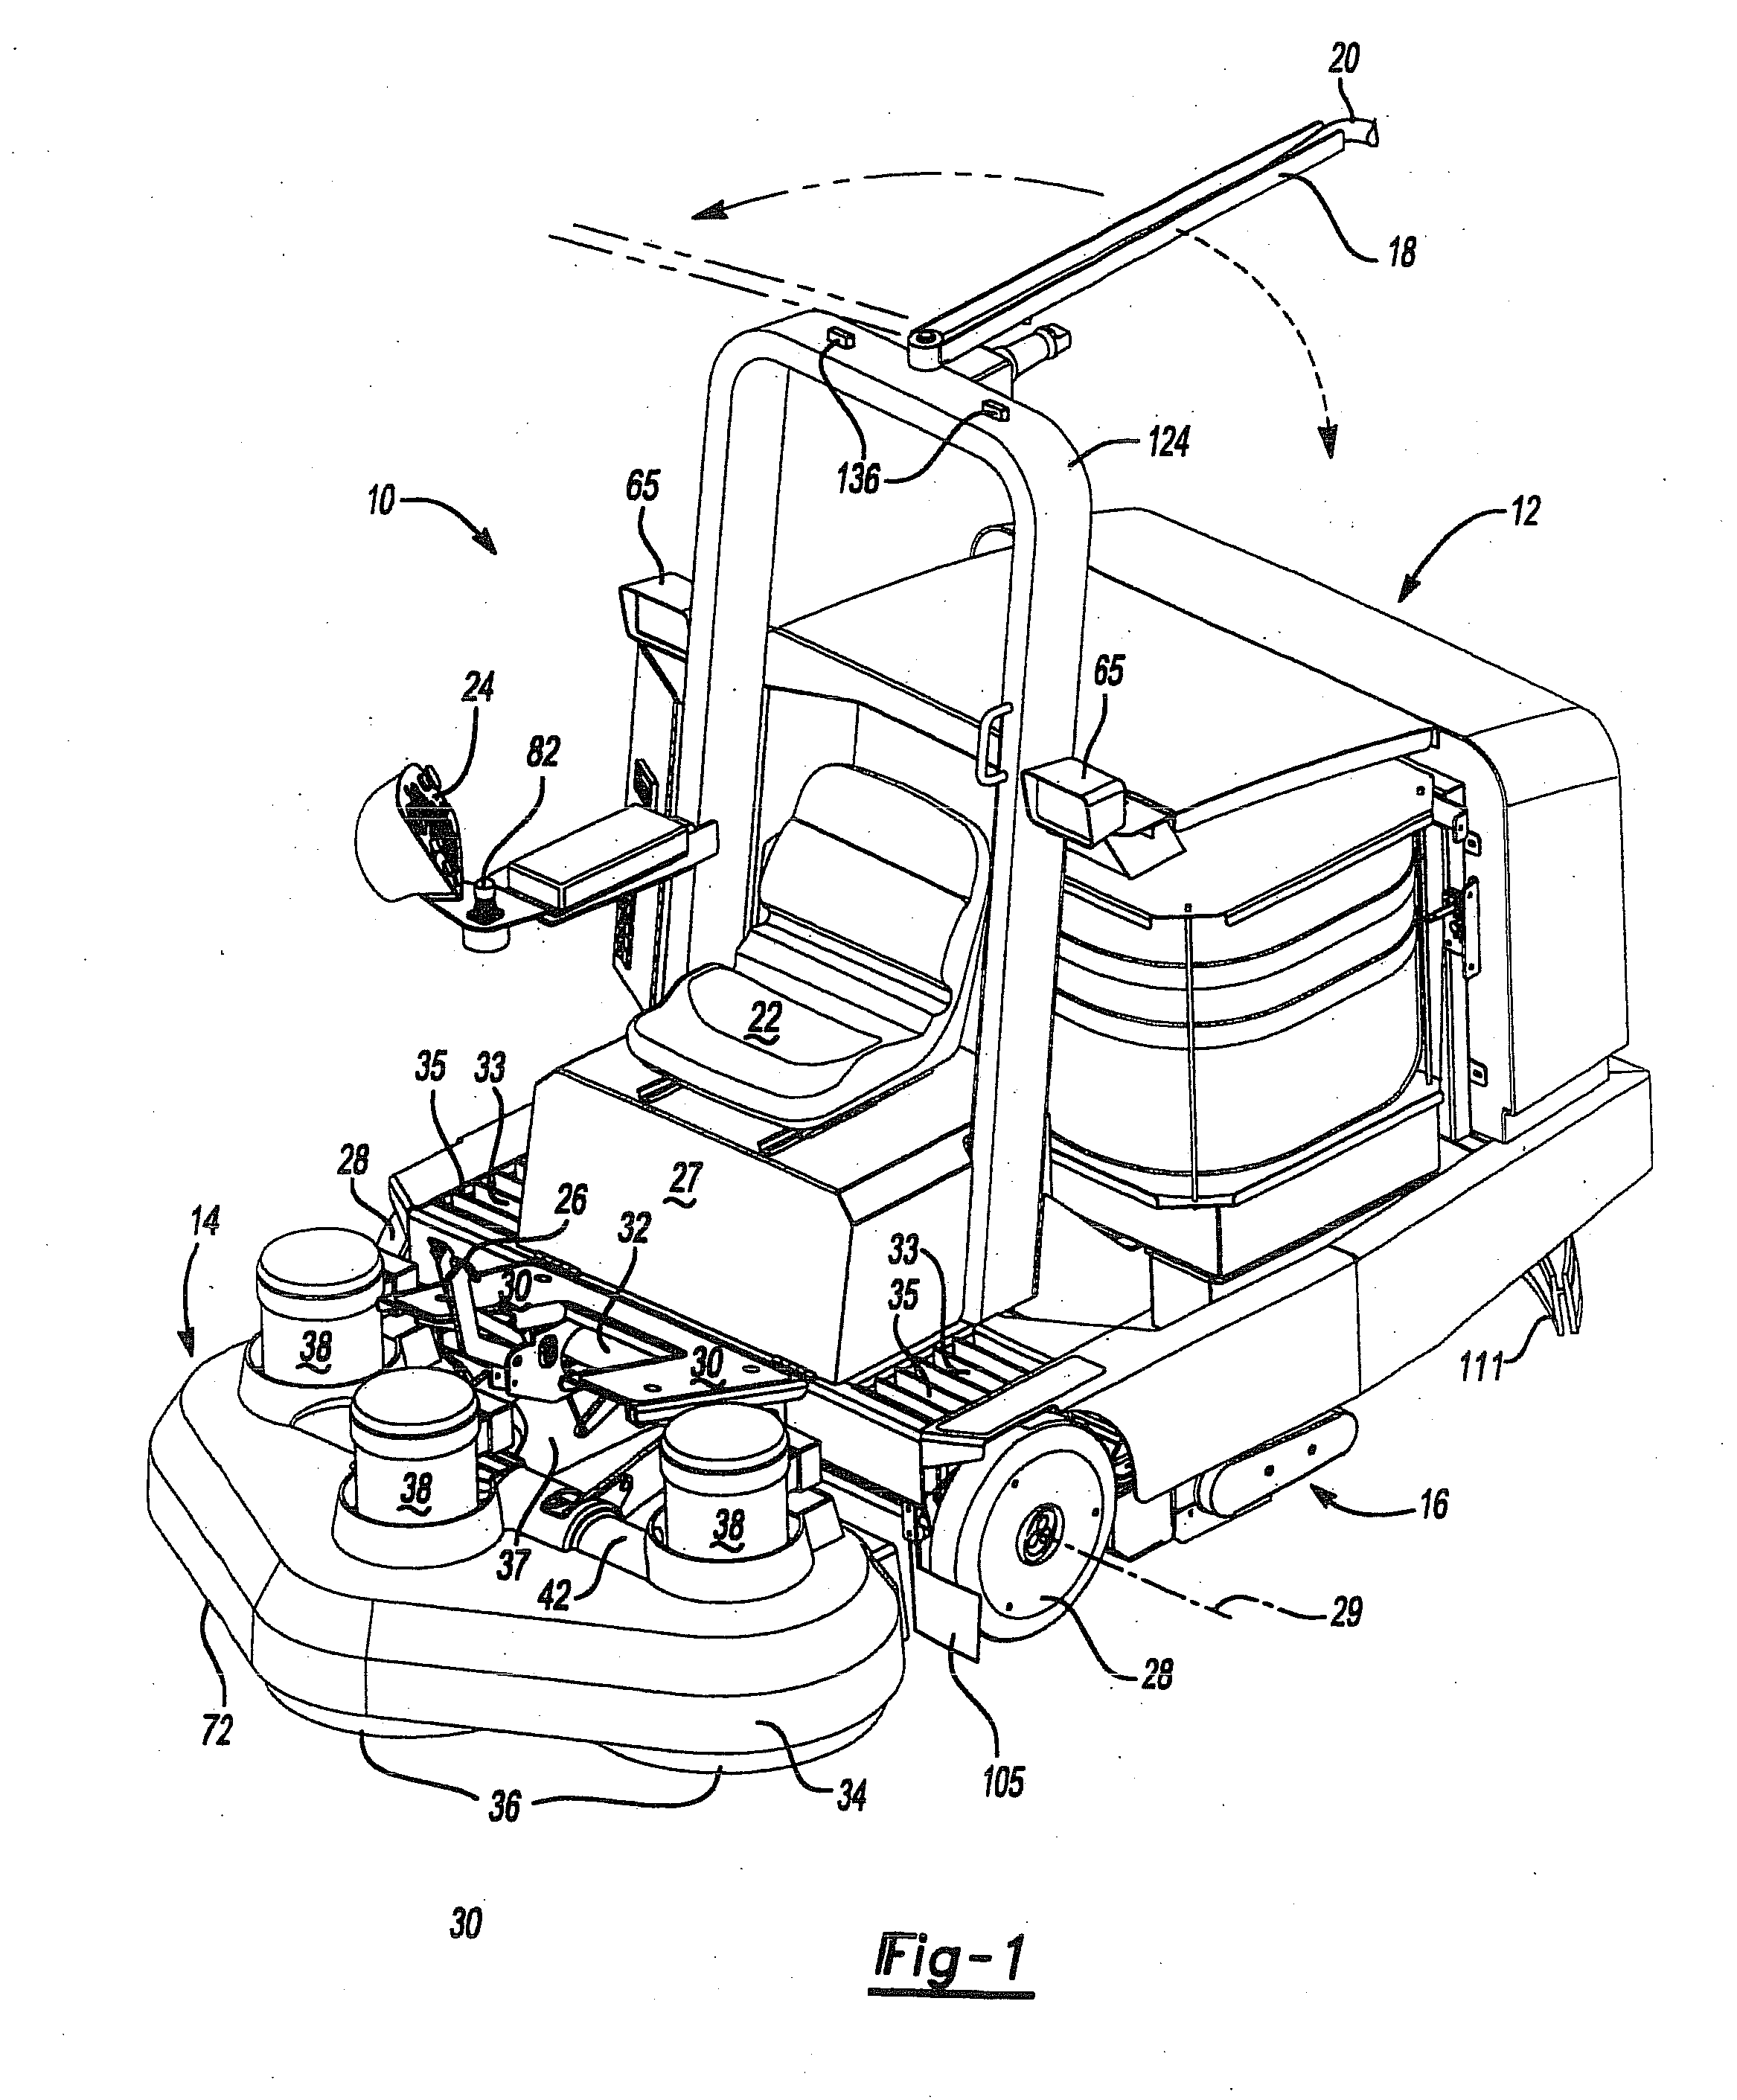 Riding Apparatus for Polishing and Cleaning Floor Surfaces